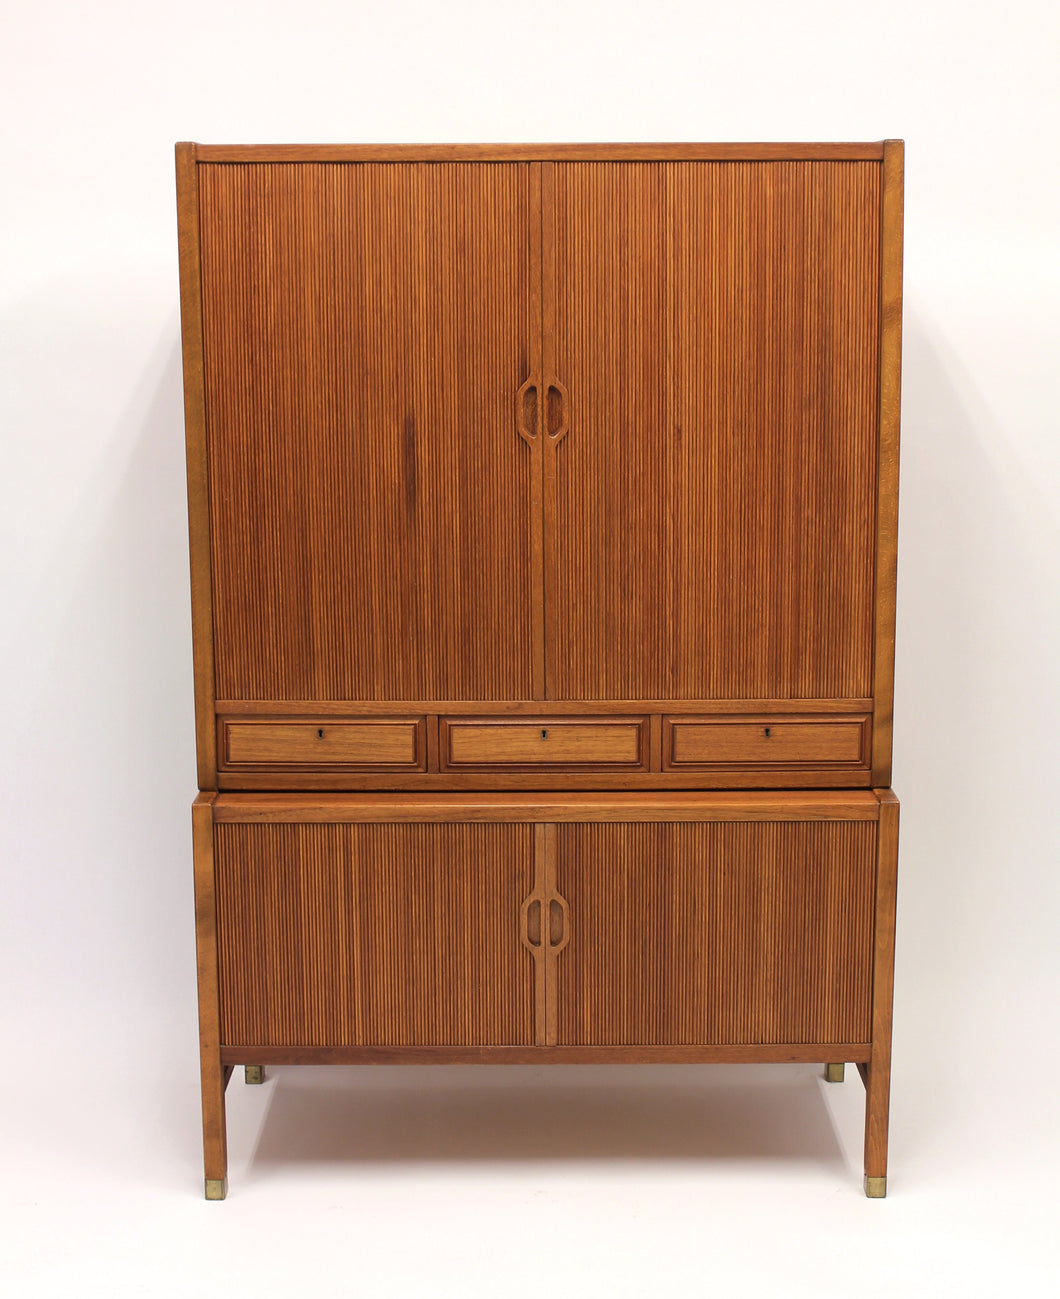 Swedish Teak Jalousie Cabinet by Carl-Axel Acking for Bodafors, 1950s